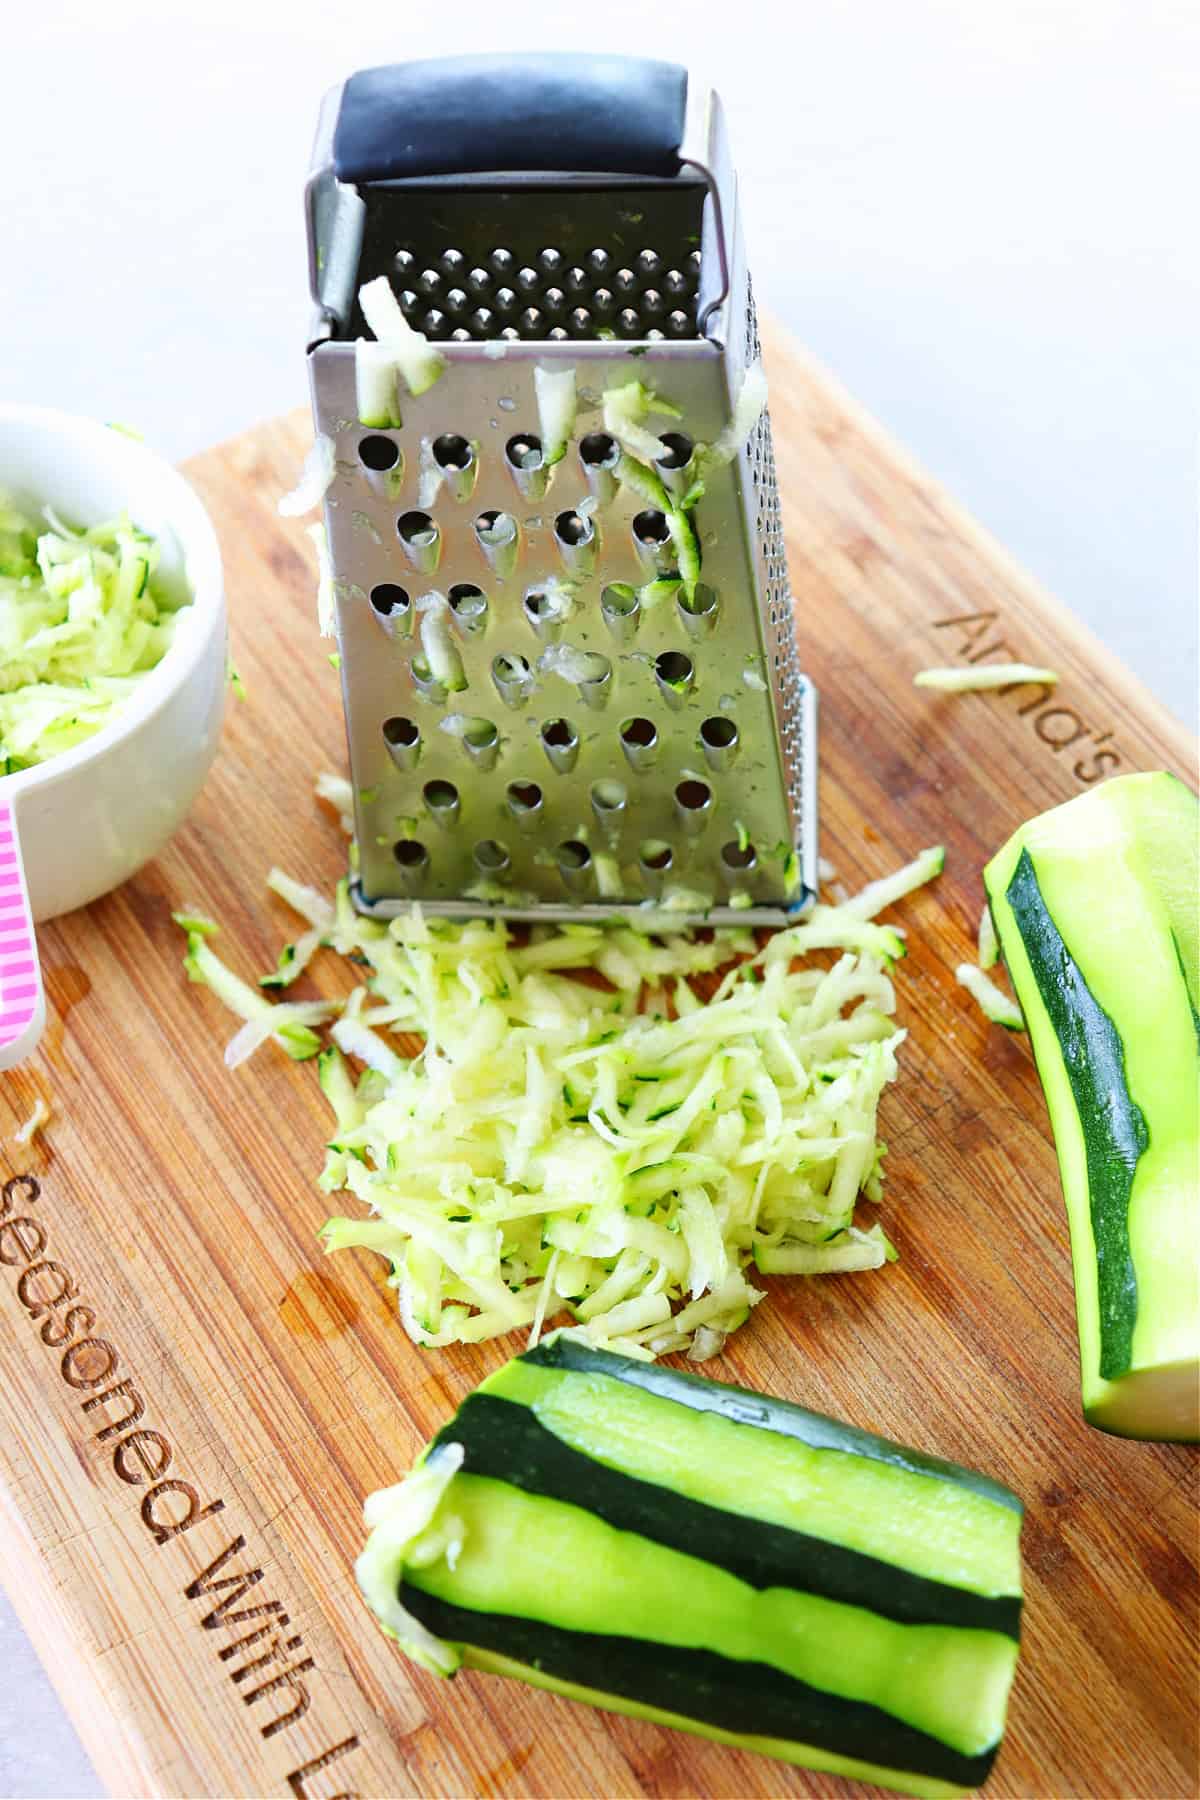 Shredded zucchini with a grater box on a wooden cutting board.